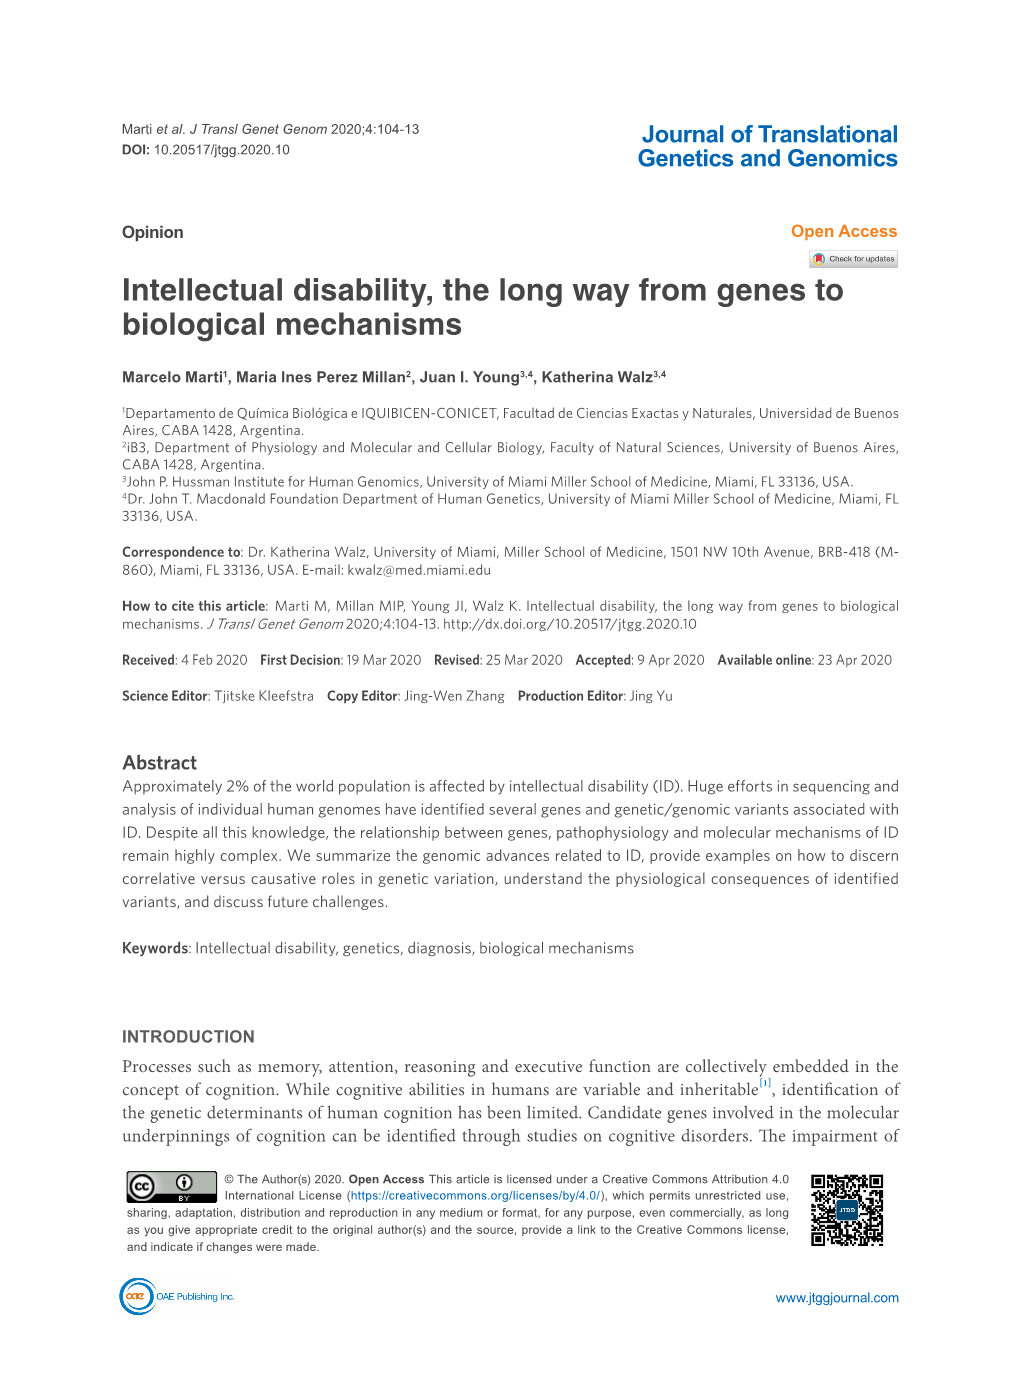 Intellectual Disability, the Long Way from Genes to Biological Mechanisms